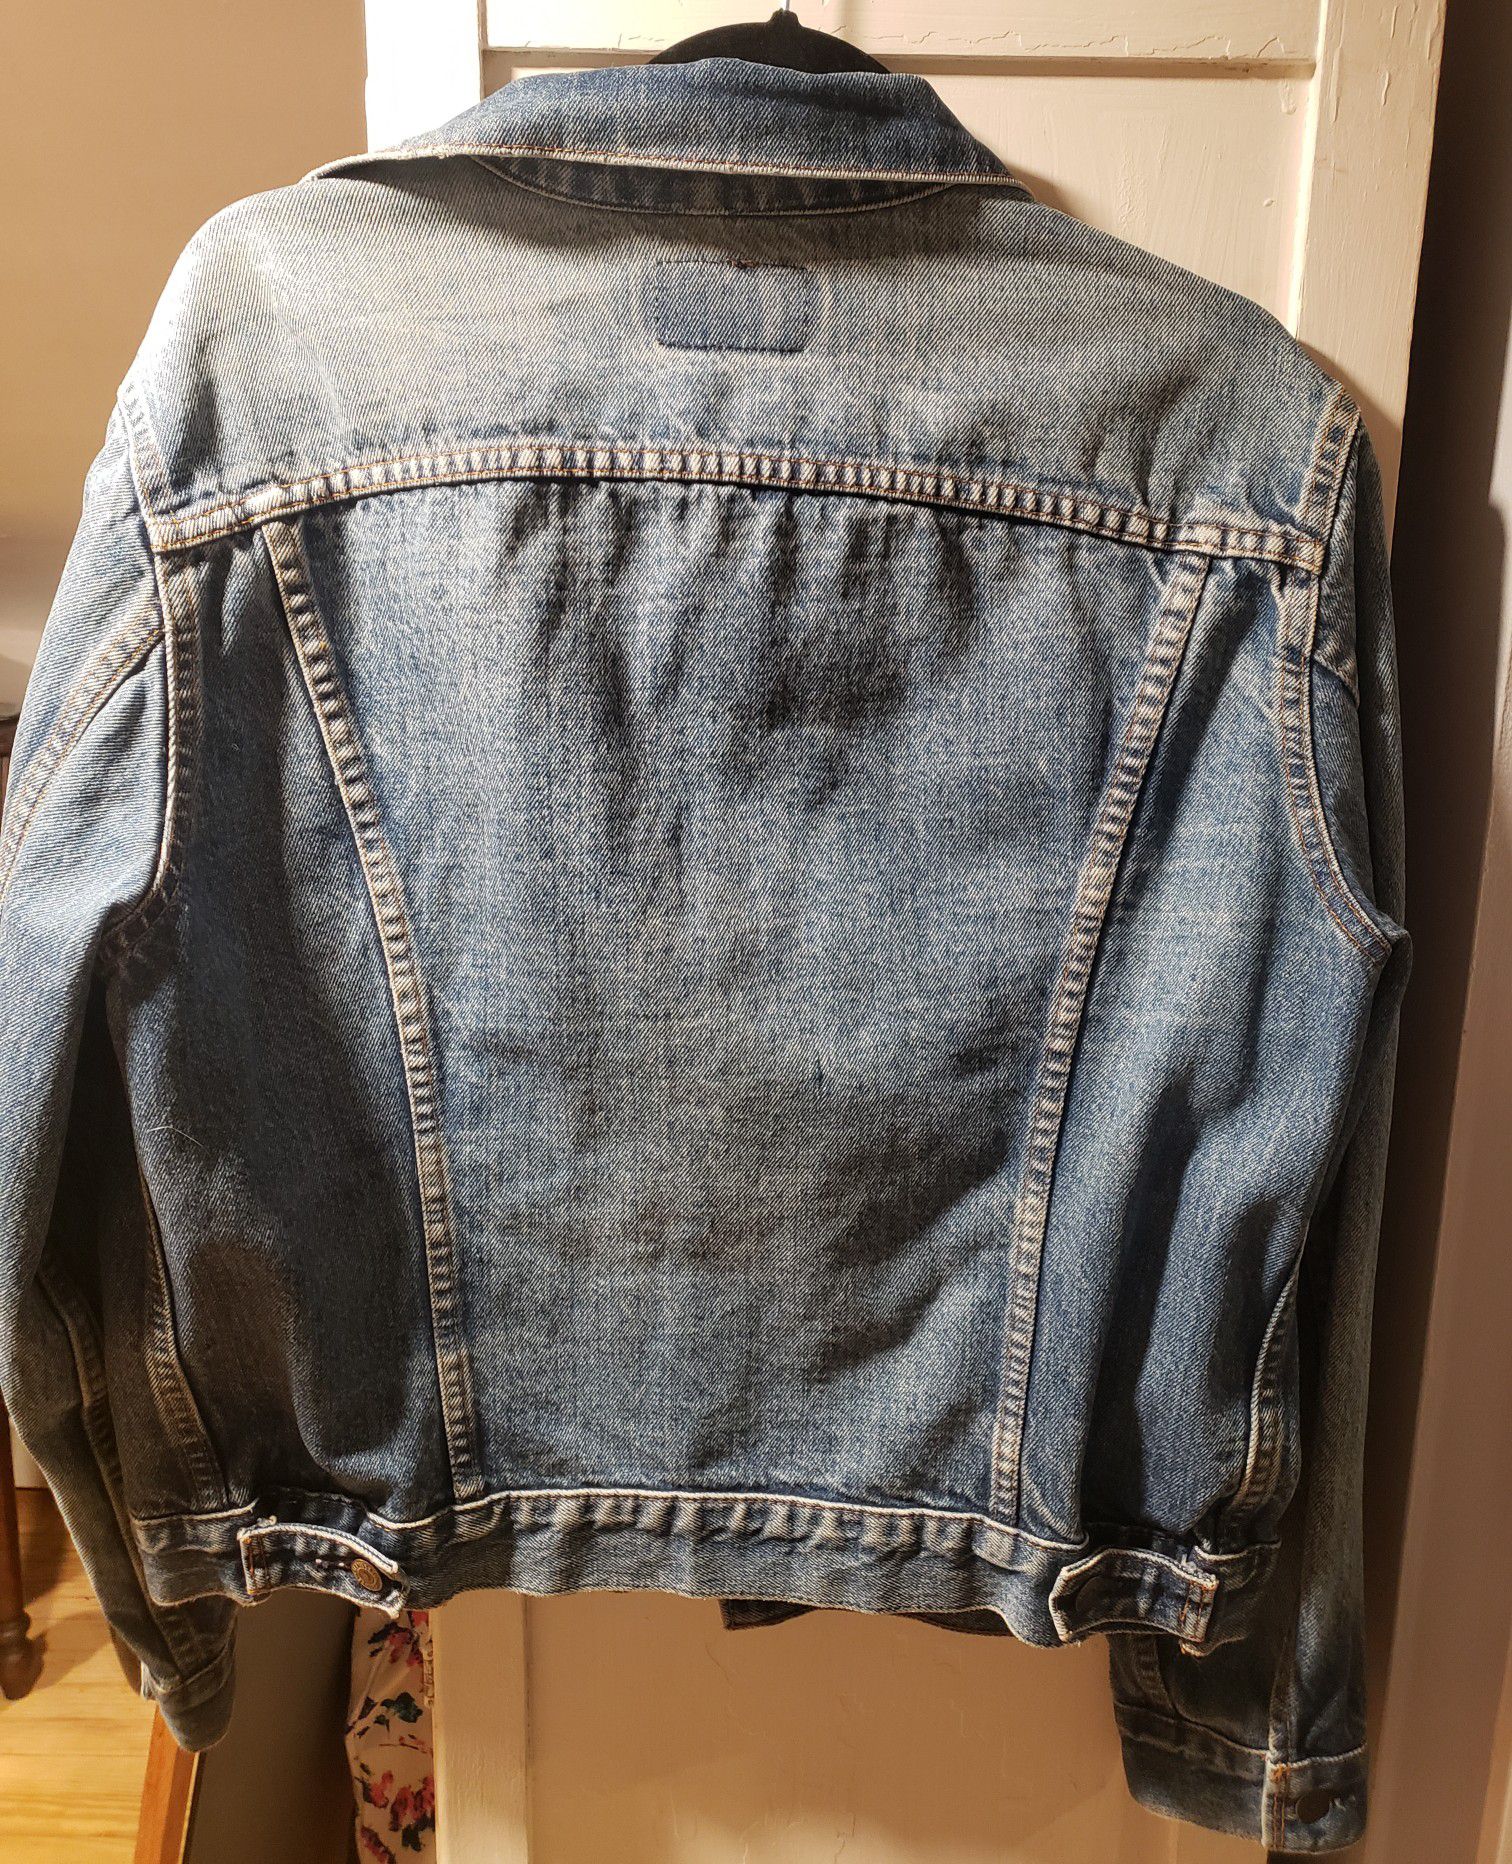 Vintage Levi Jean Jacket size 44, the jean is a bit less faded and more blue in person.